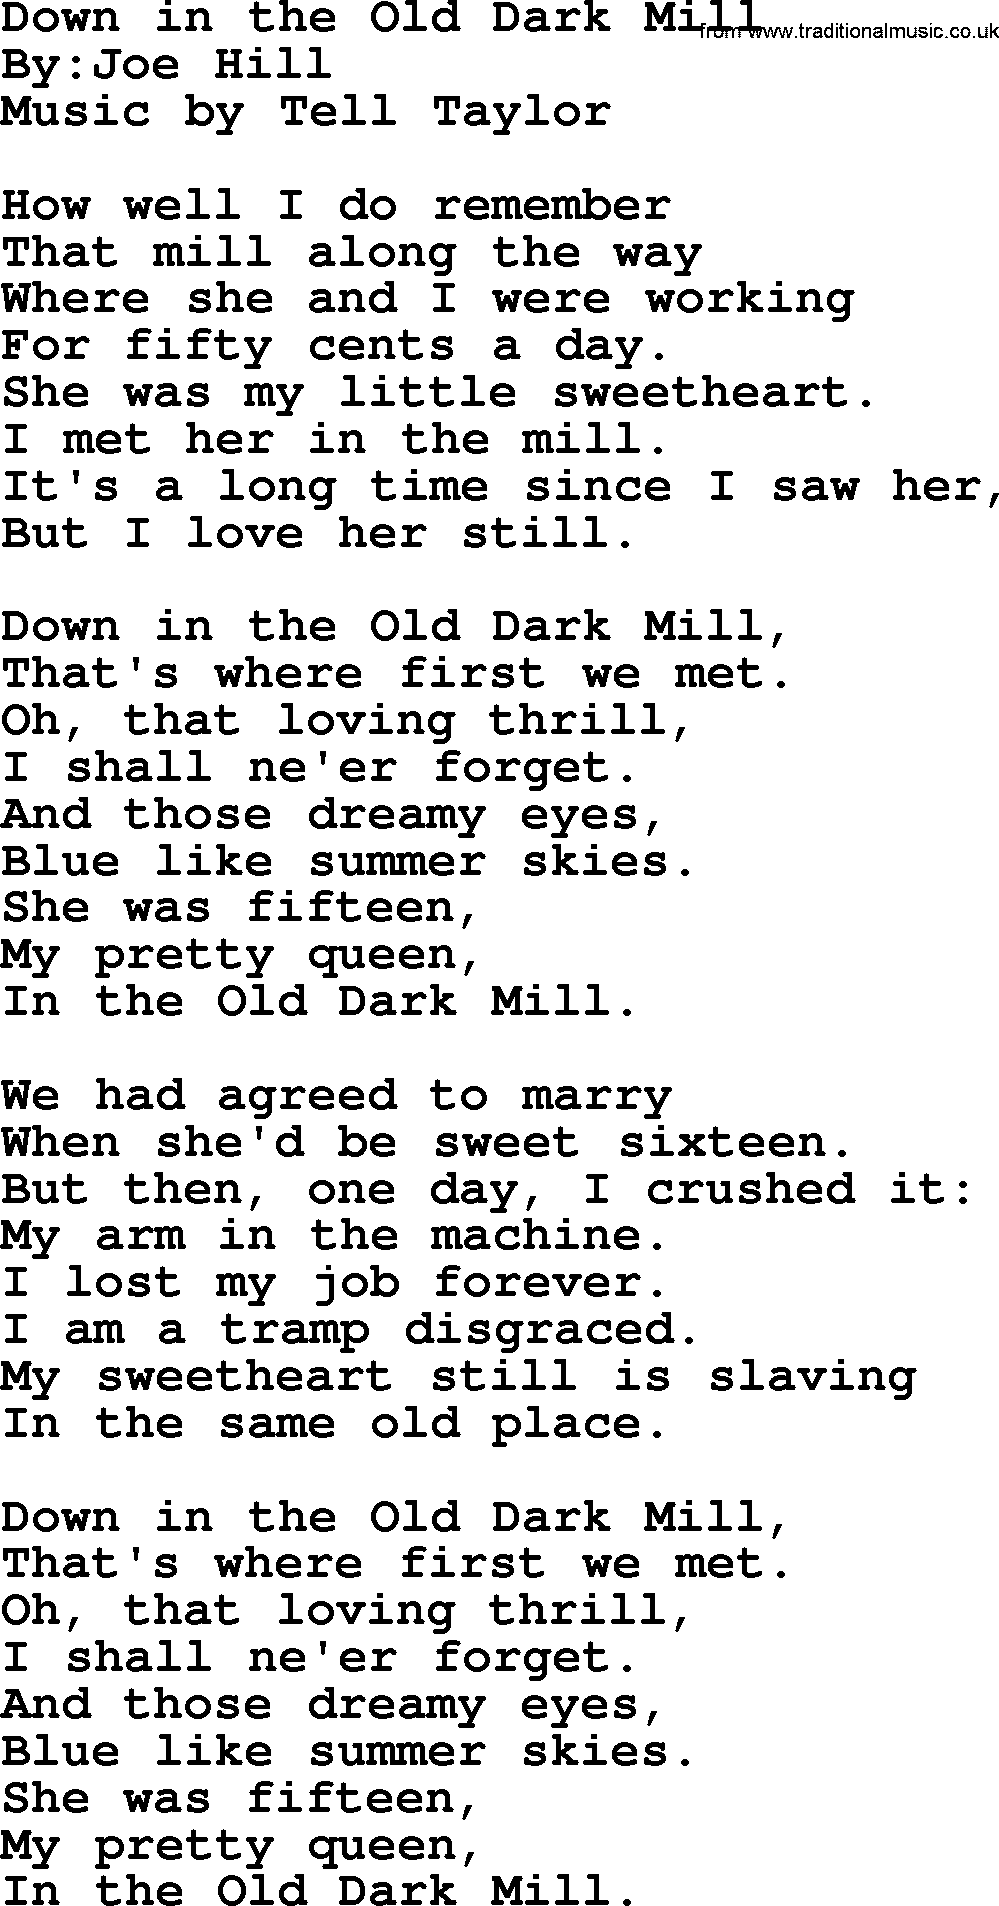 Political, Solidarity, Workers or Union song: Down In The Old Dark Mill, lyrics